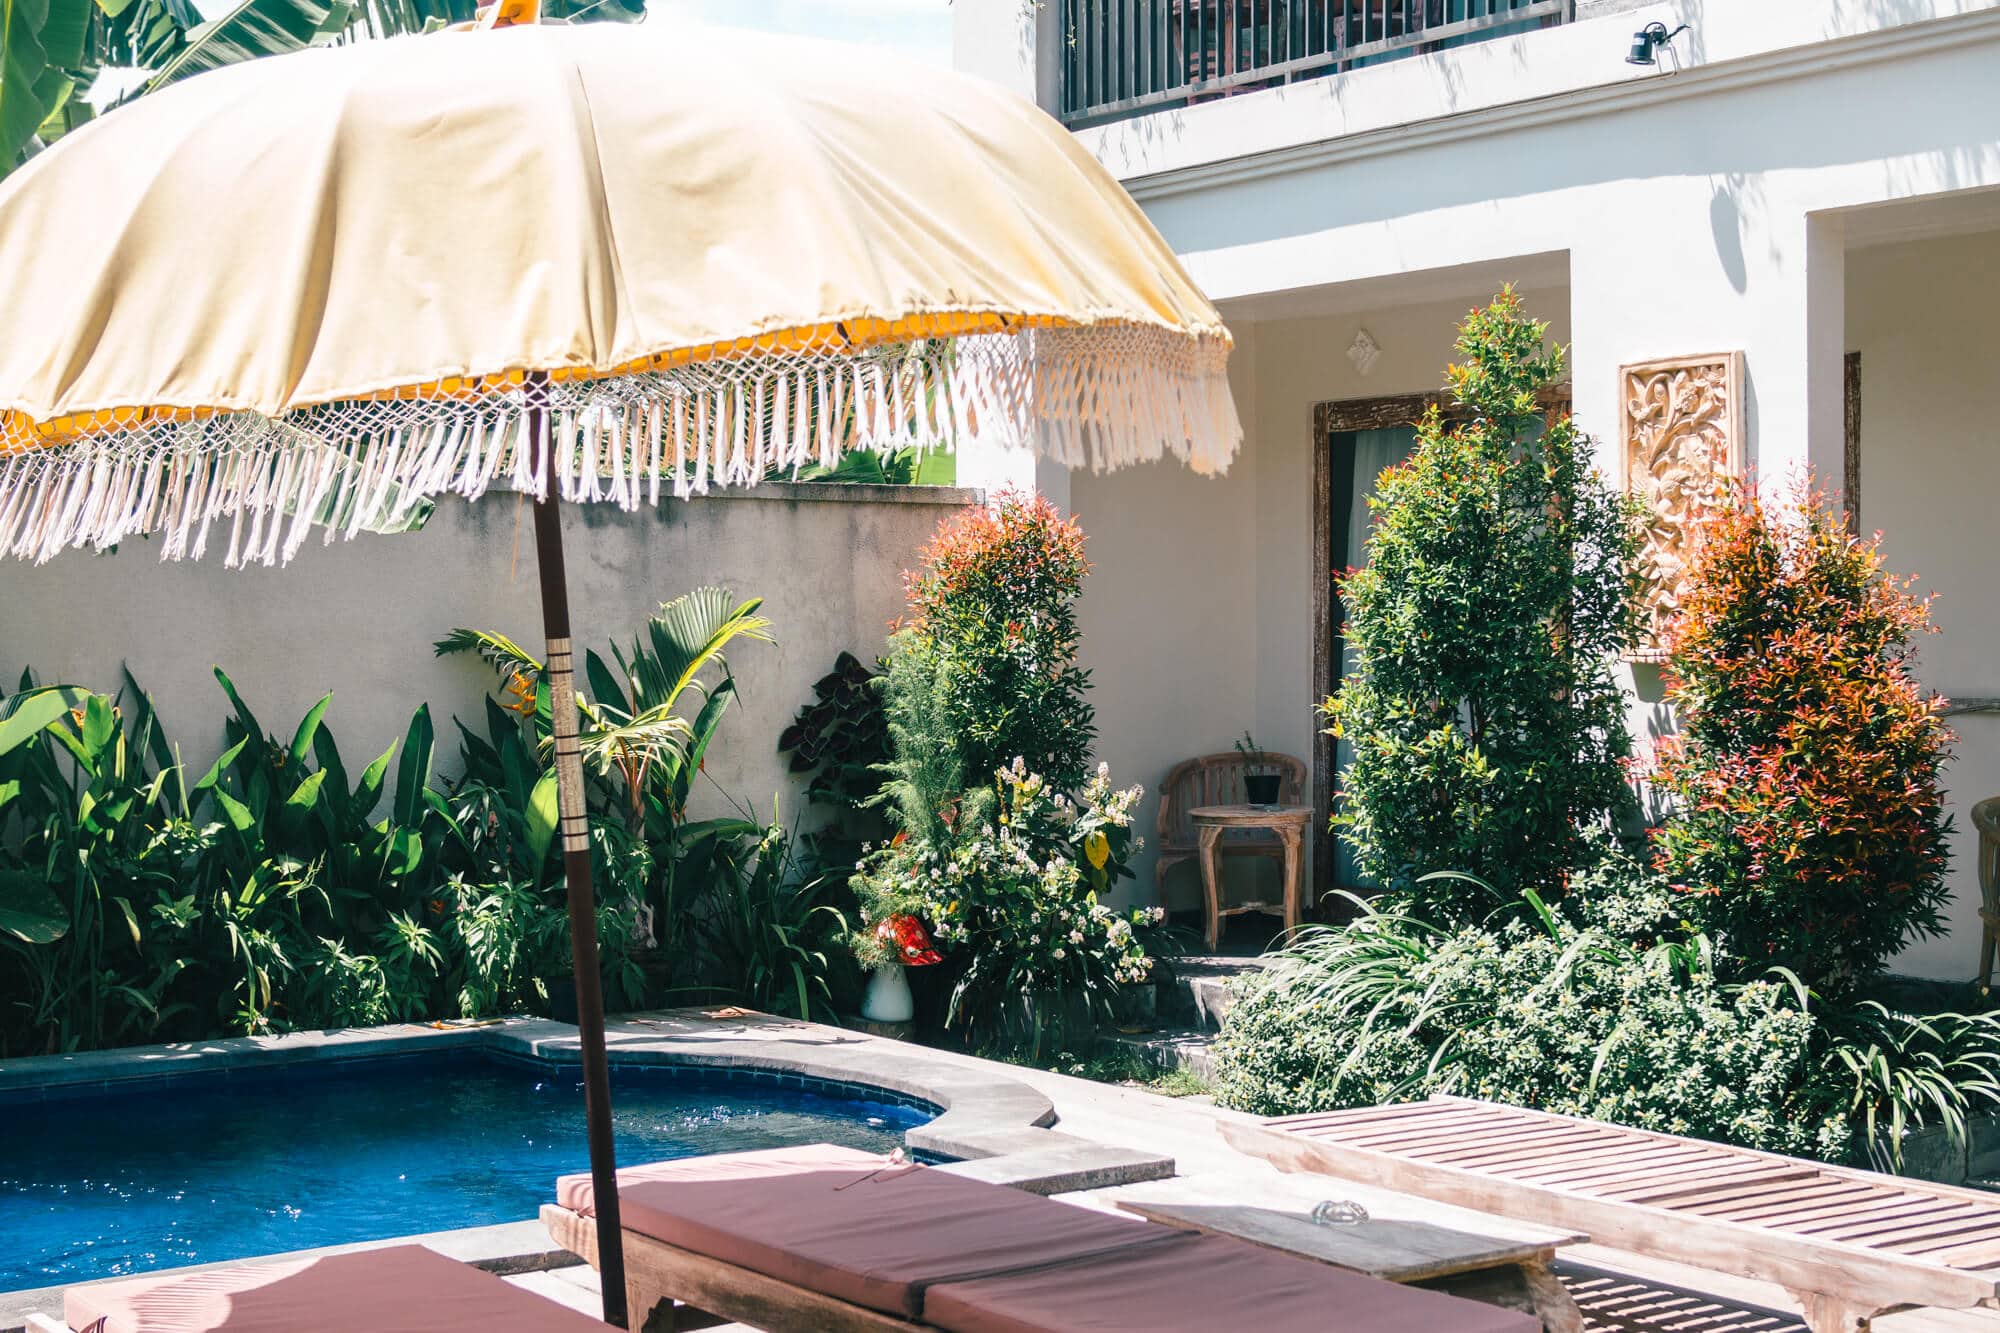 Bali's best budget hotels, villas & Airbnbs - The Spare Room is the best value Airbnb in Canggu